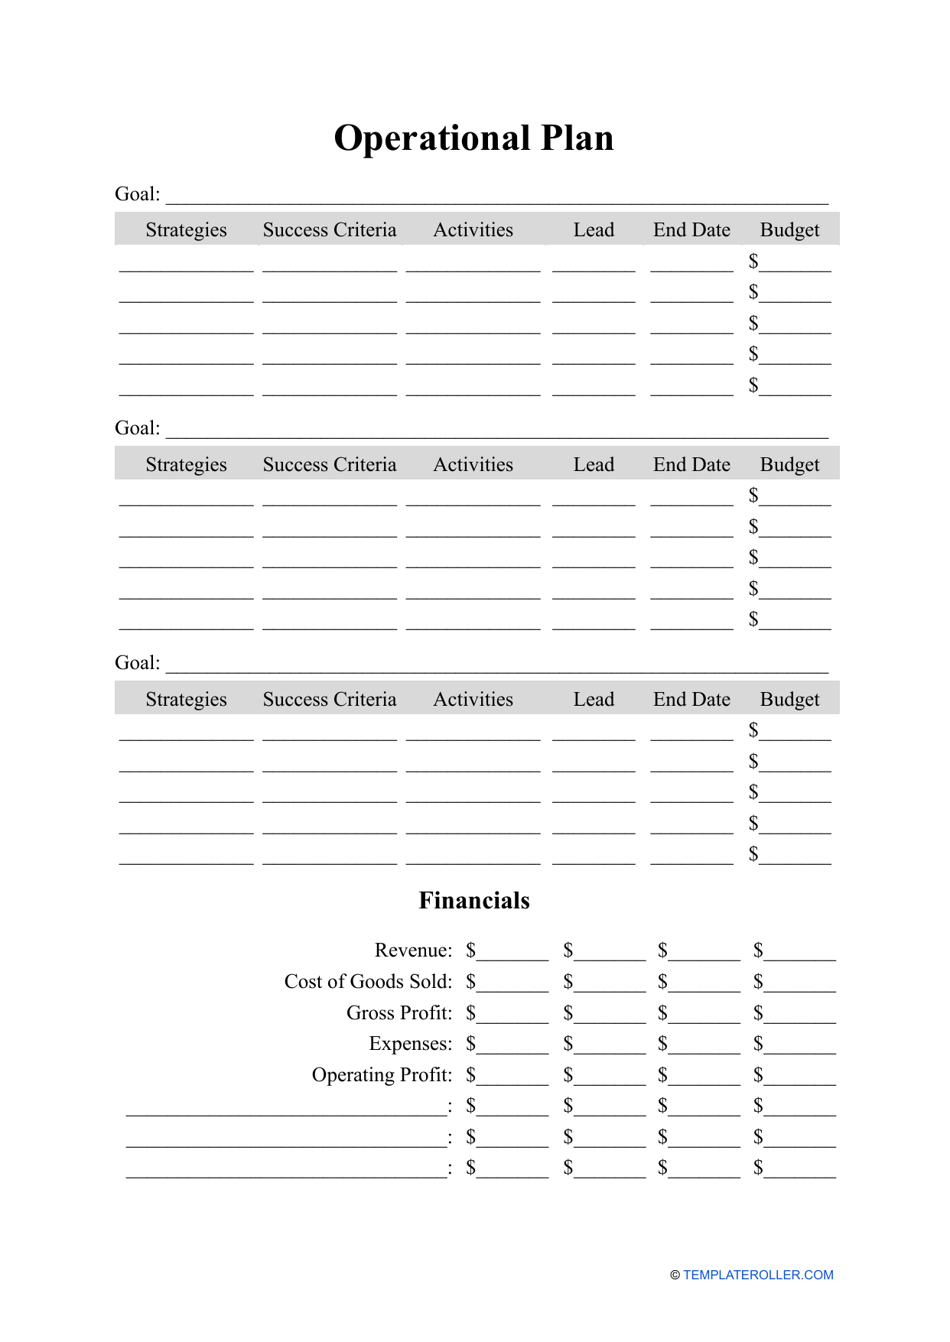 Operational Plan Template, Page 1